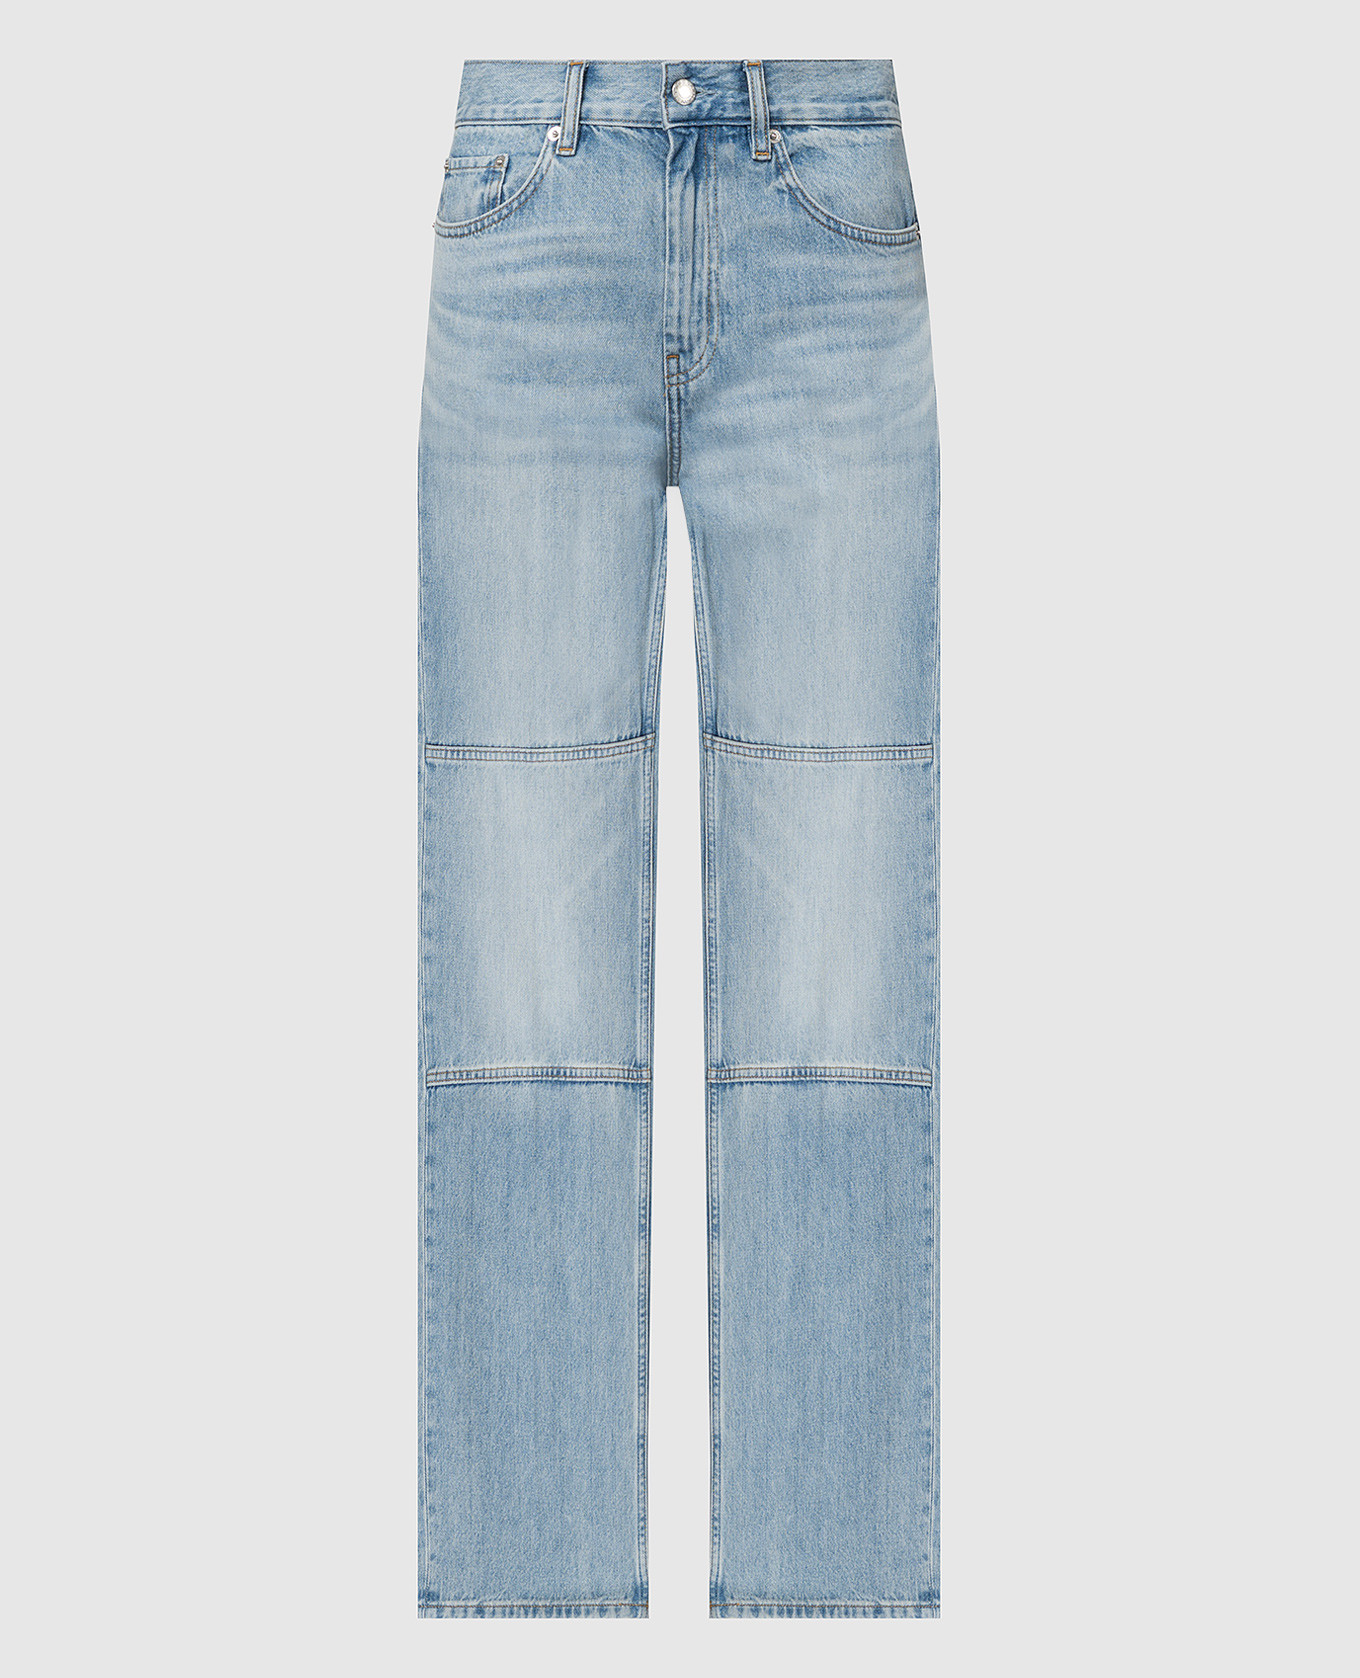 Blue jeans with accent seams